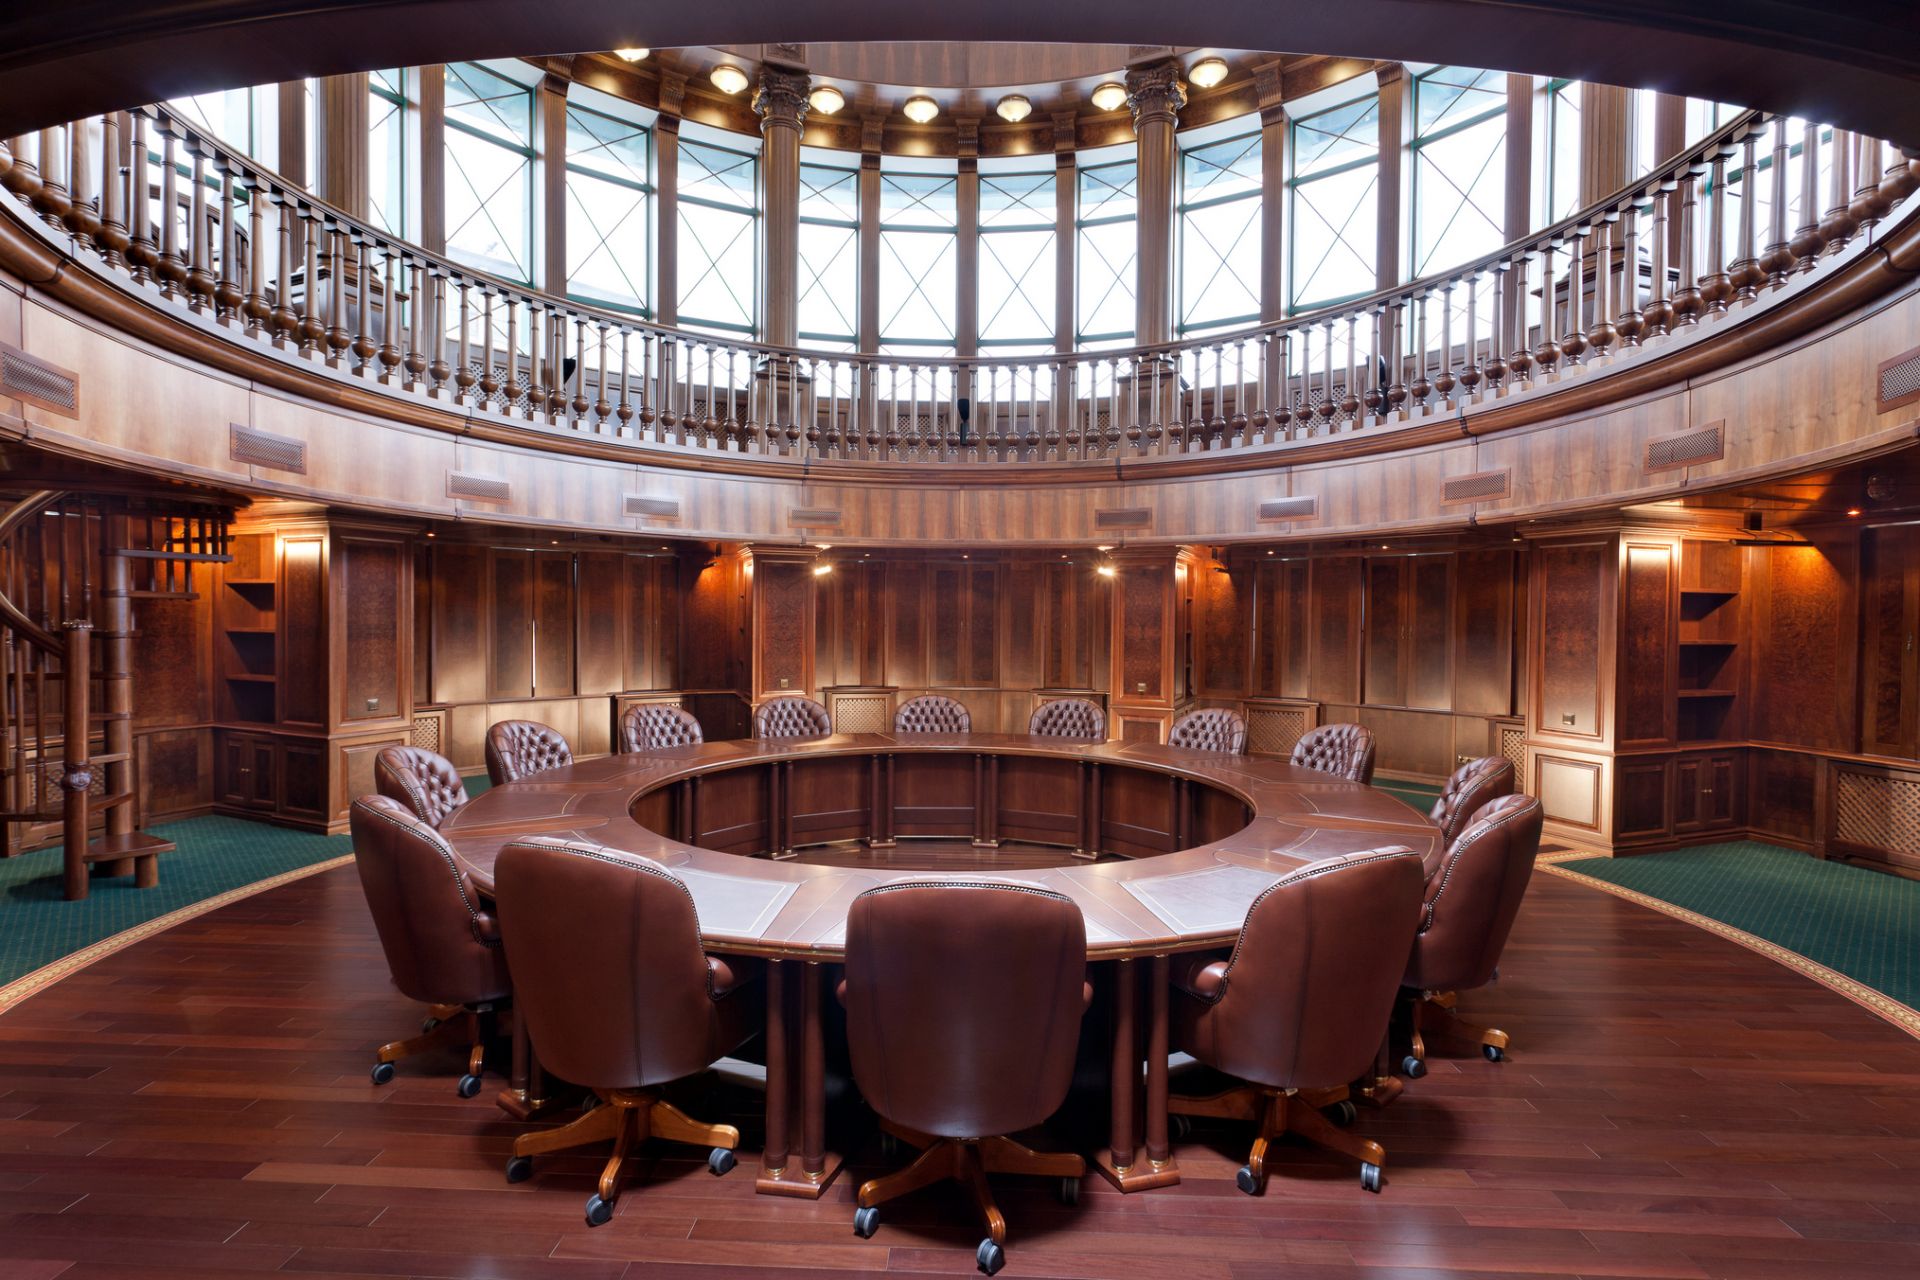 Wooden round table in the library of Arcada Bank